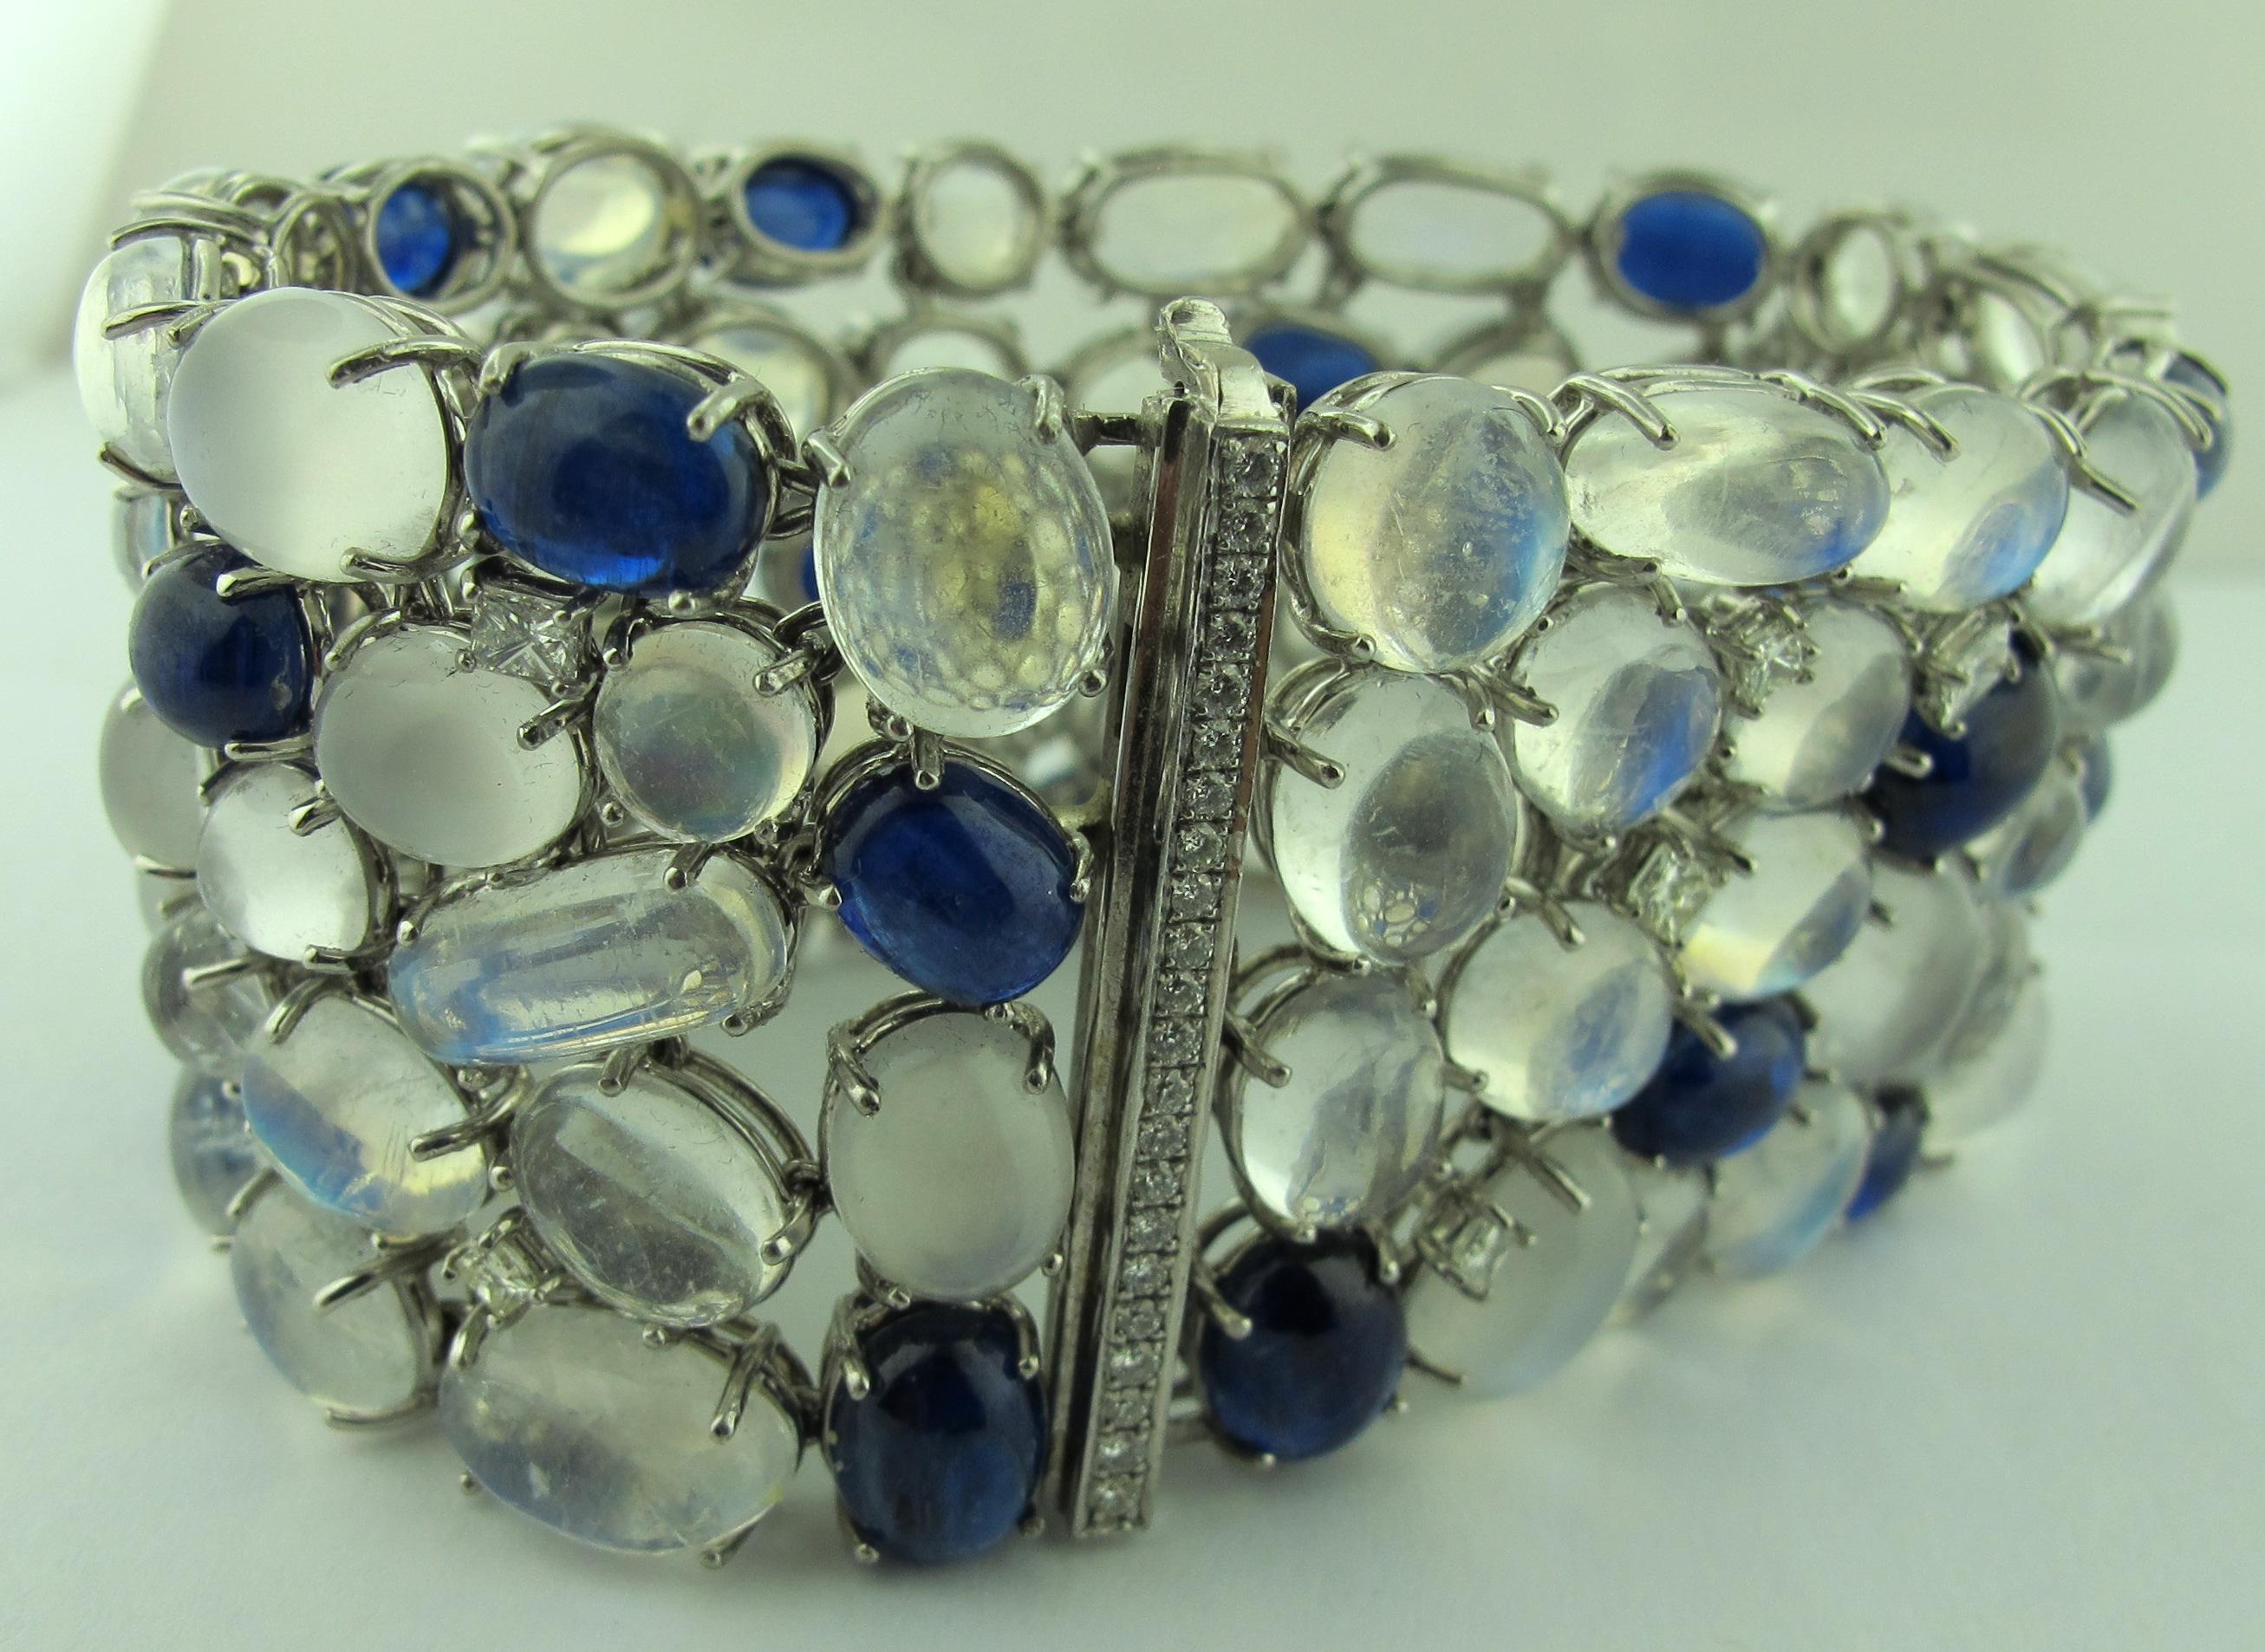 Multi Stone Bracelet with 3.00 carats of Diamonds, 124 carats of Moonstone and 45 carats of Kyanite.  Set in 18 karat white gold.